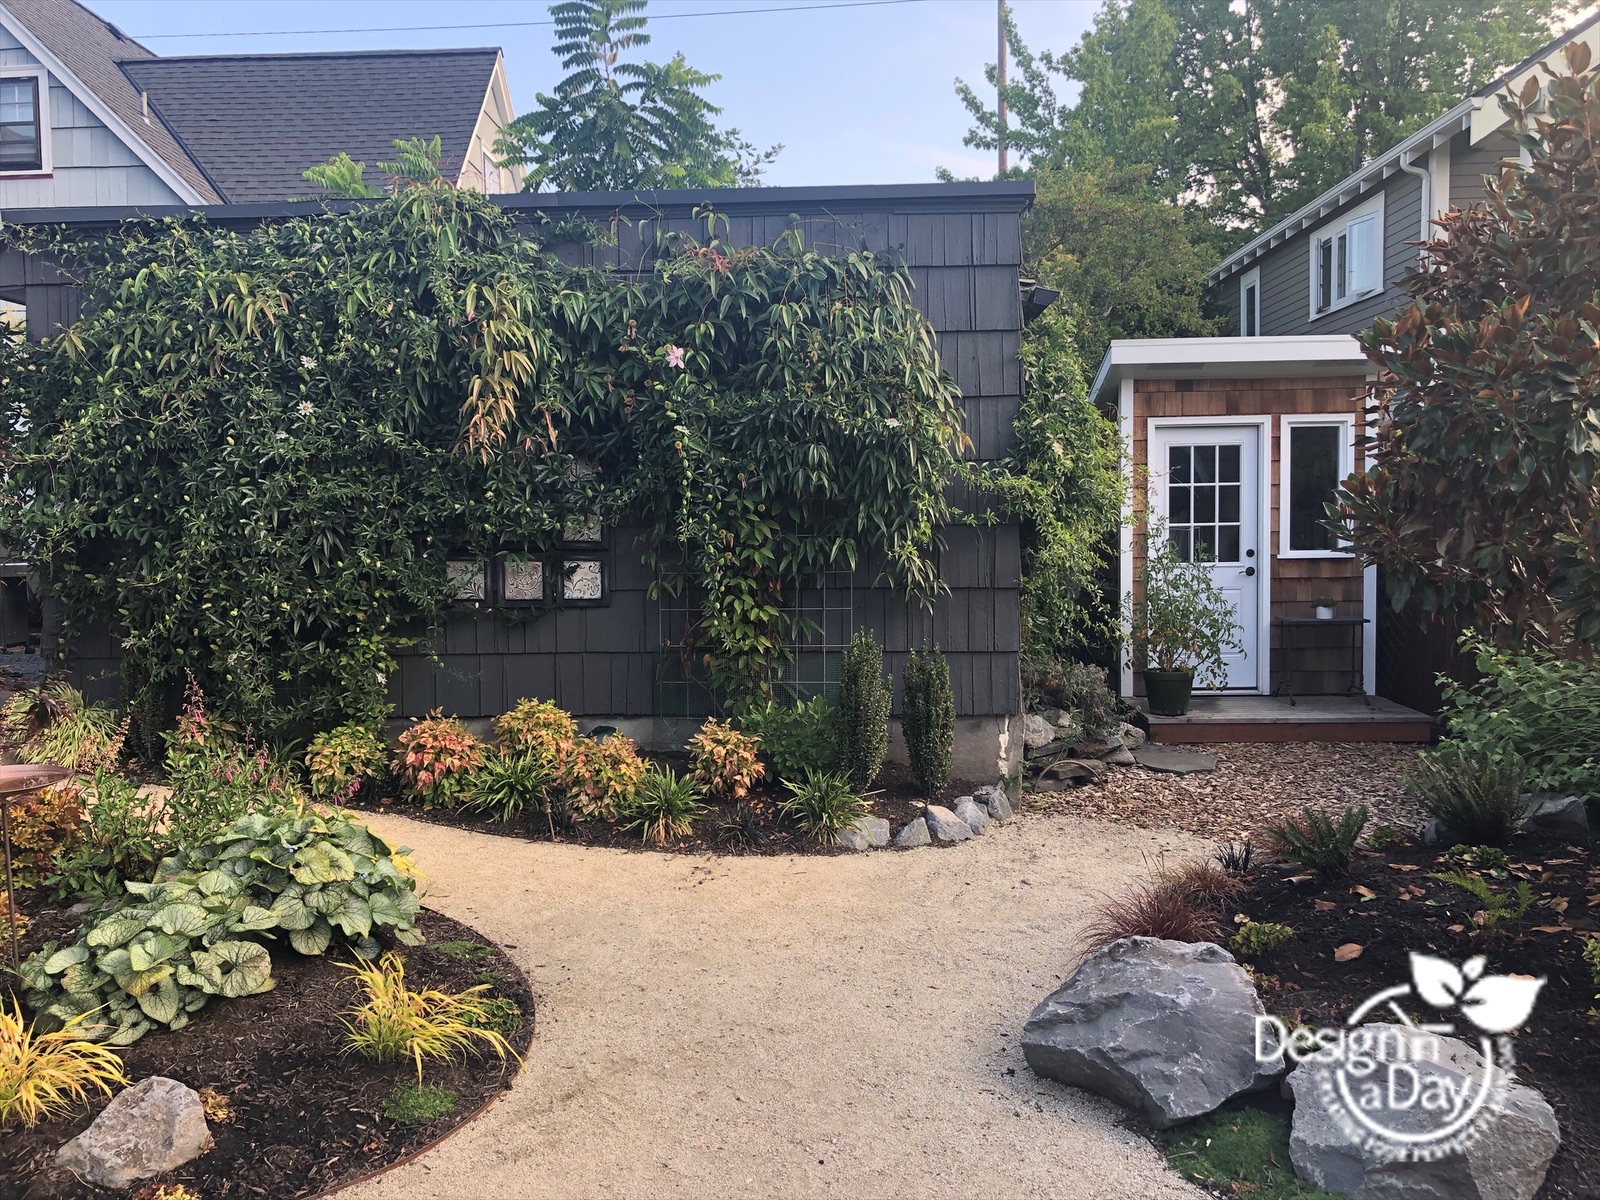 Outdoor living landscaping with granite path and custom shed in Grant Park neighborhood.